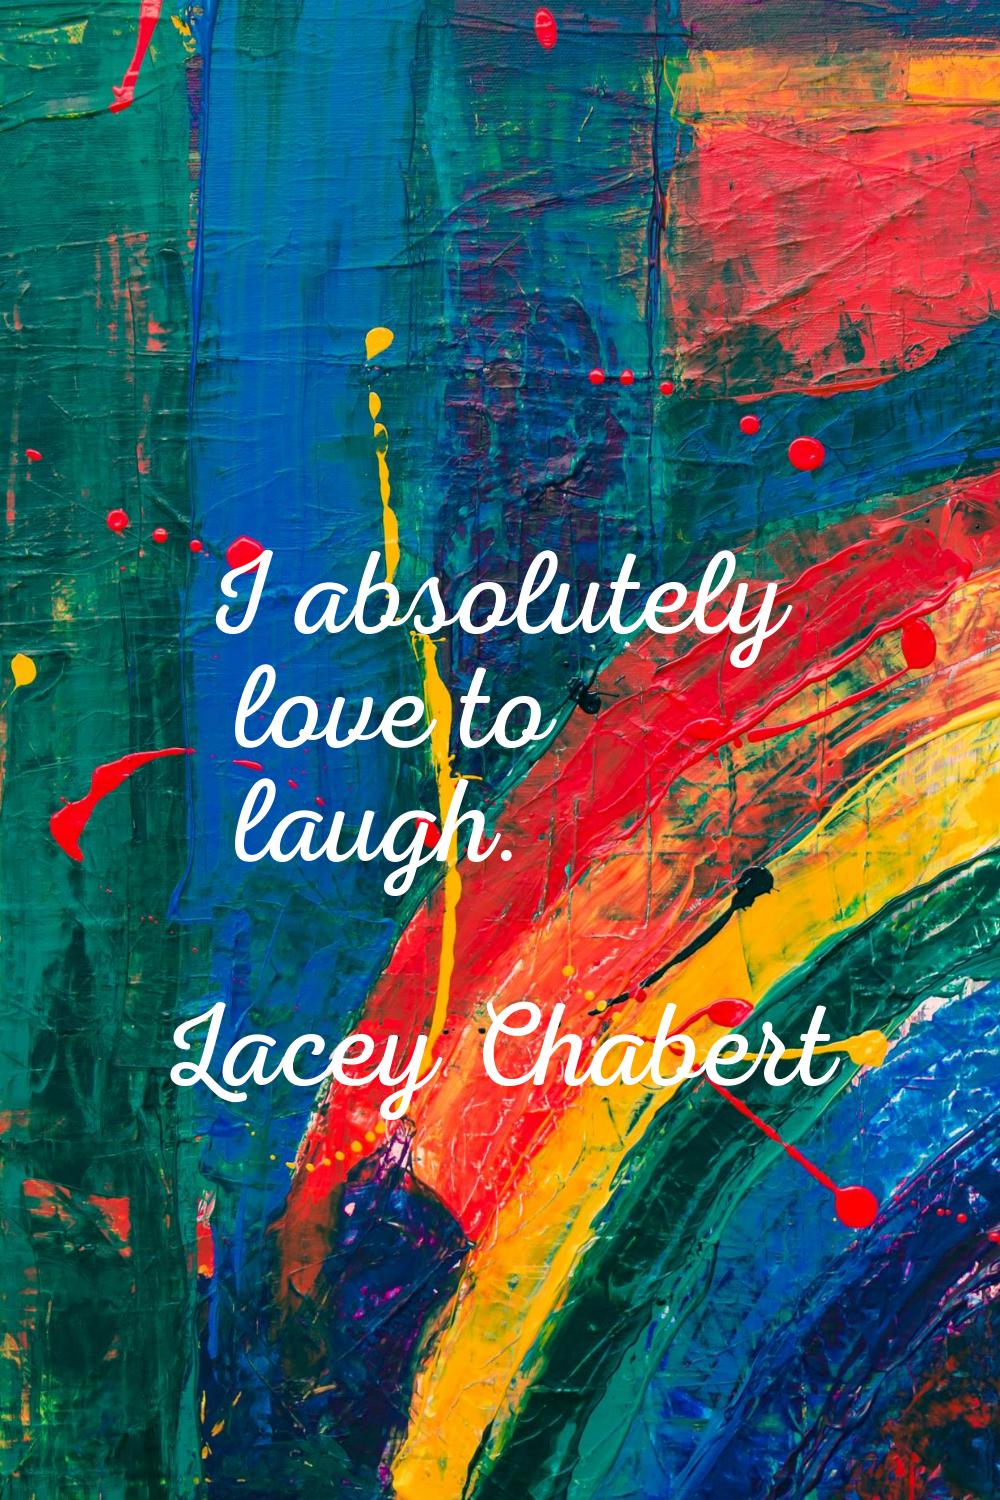 I absolutely love to laugh.